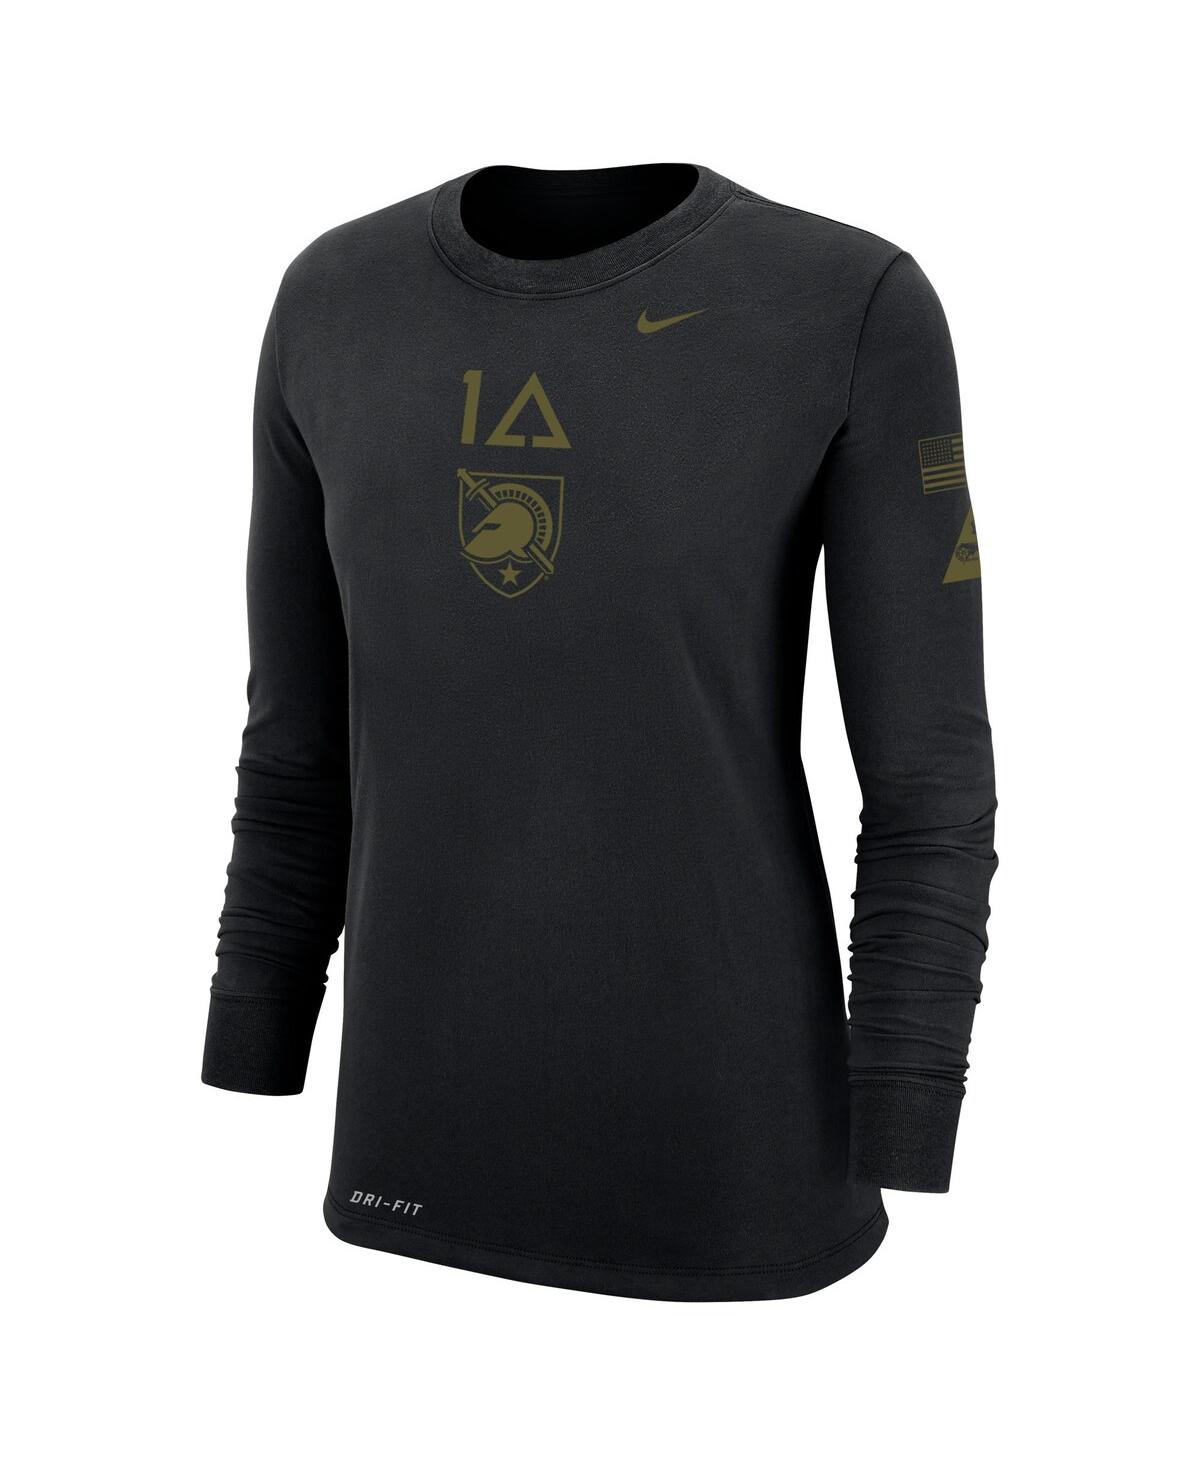 Shop Nike Women's  Black Army Black Knights 1st Armored Division Old Ironsides Operation Torch Long Sleeve